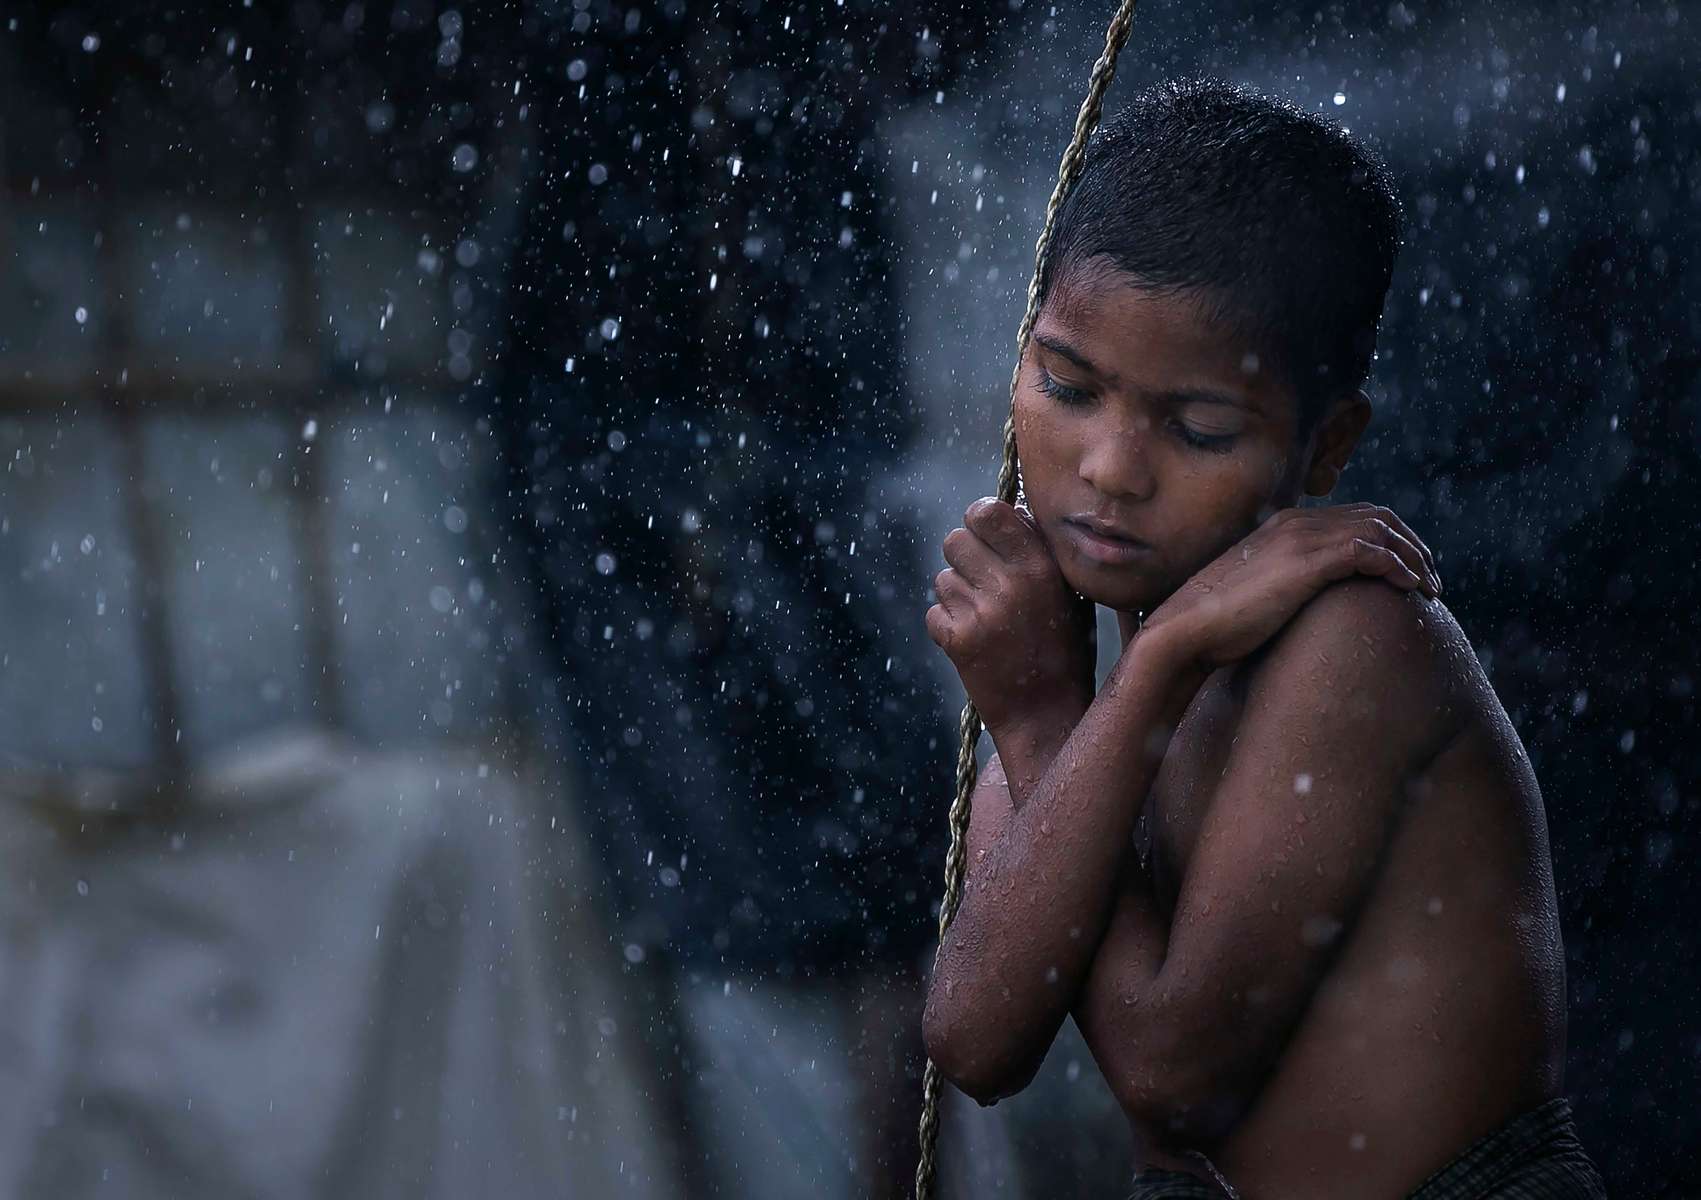 A Rohingya refugee is seen during a rainstorm at Nayapara refugee camp in Cox's Bazar, Bangladesh. Rohingya refugees said on August 21st that they did not want to return to Myanmar without their rights and citizenship, as repatriation is set to start on August 22nd. August 25th marks the second anniversary of the Rohingya crisis in Bangladesh. Myanmar's military crackdown on the ethnic Muslim minority forced over 700,000 to flee to Bangladesh from violence and torture. The United Nations has stated that it is a textbook example of ethnic cleansing. 